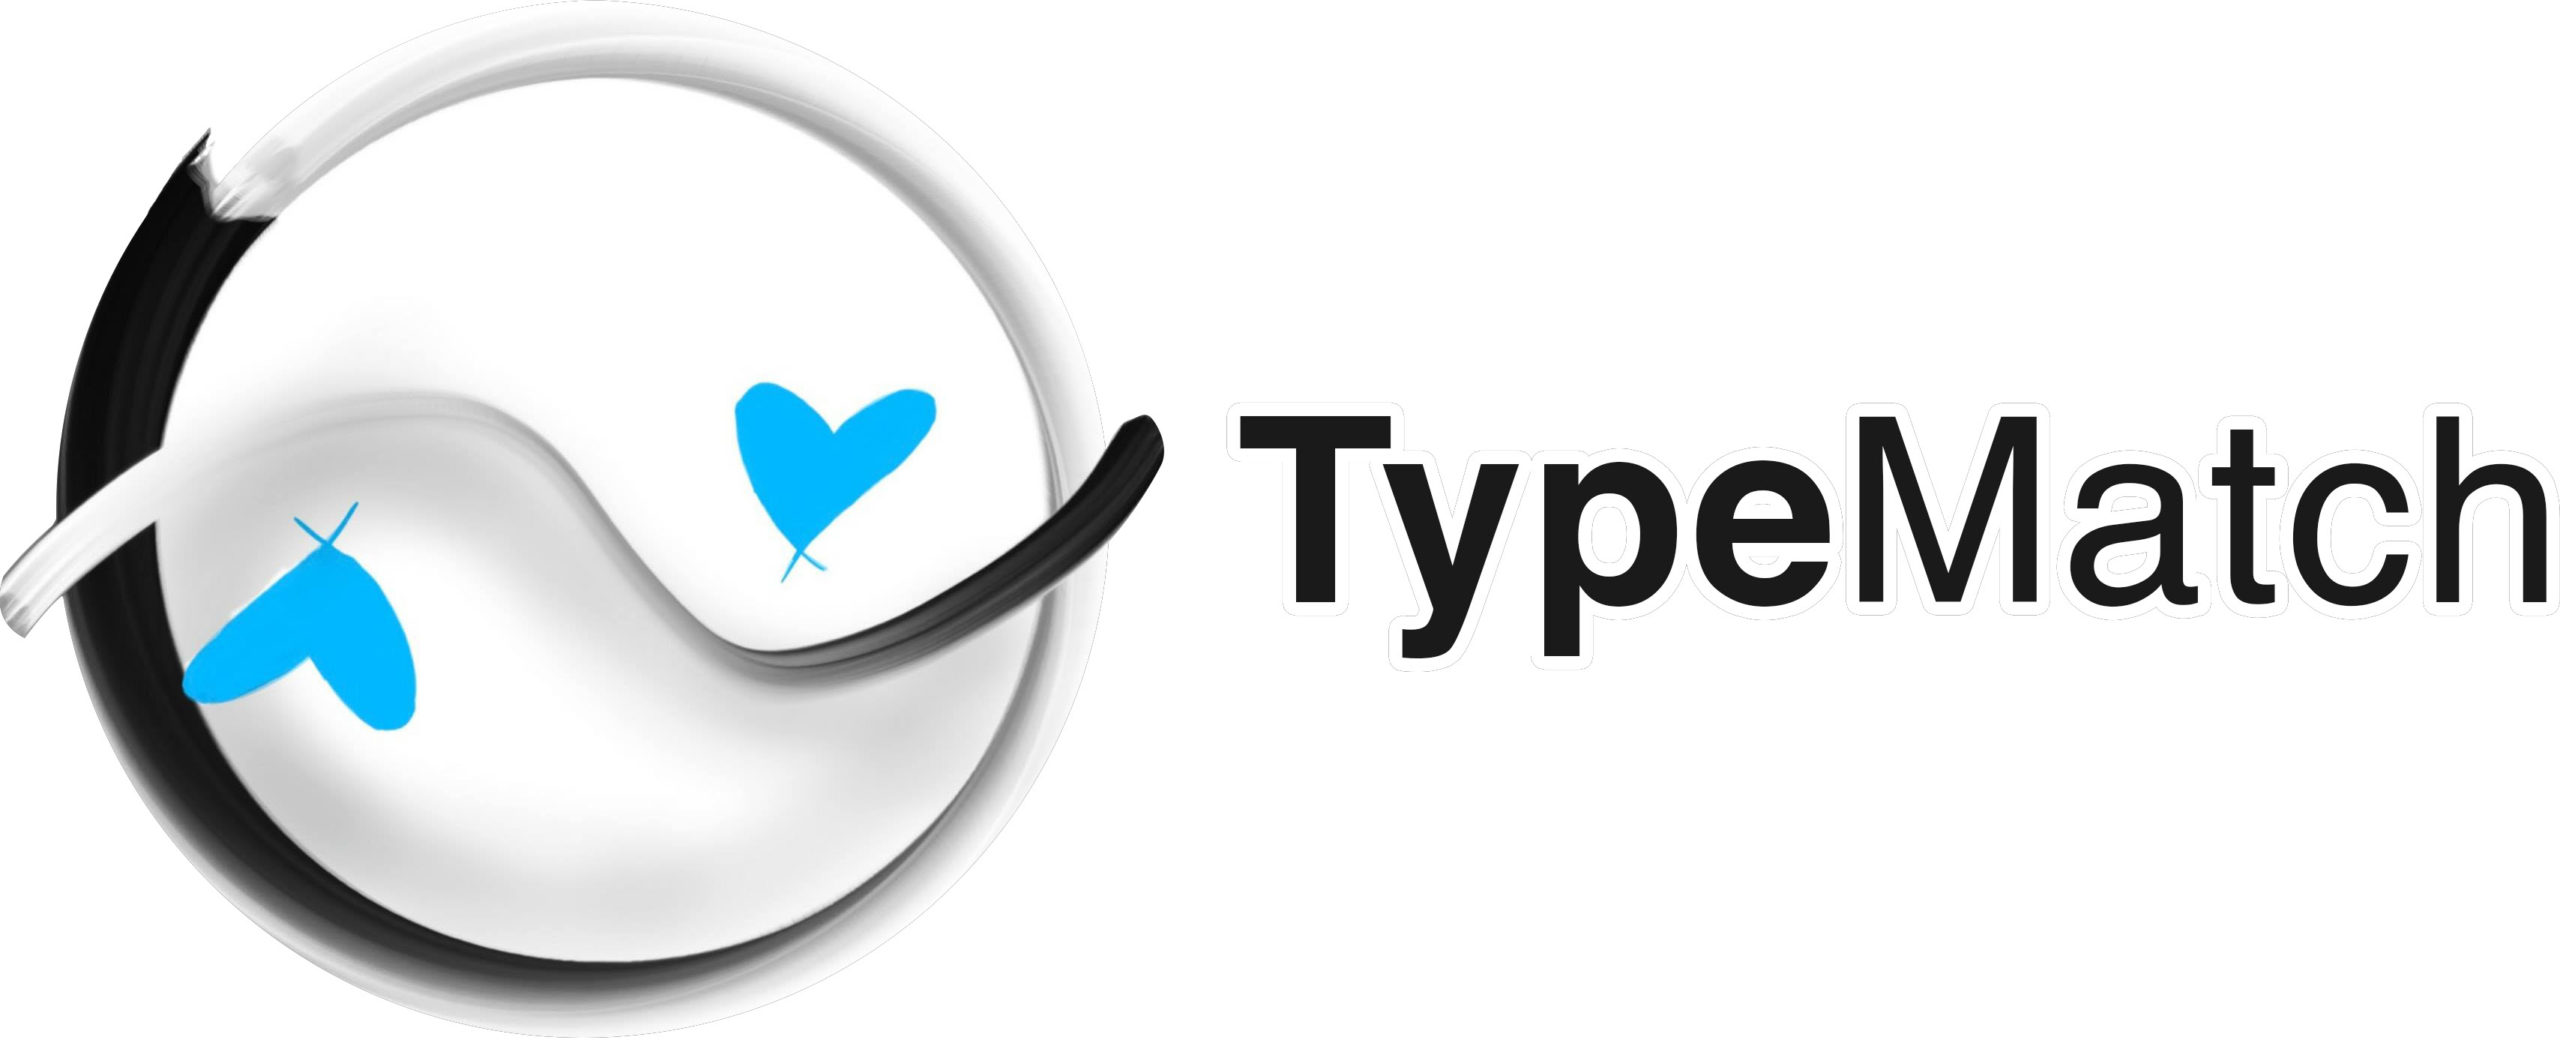 TypeMatch - Data is beautiful. Who are you most attracted